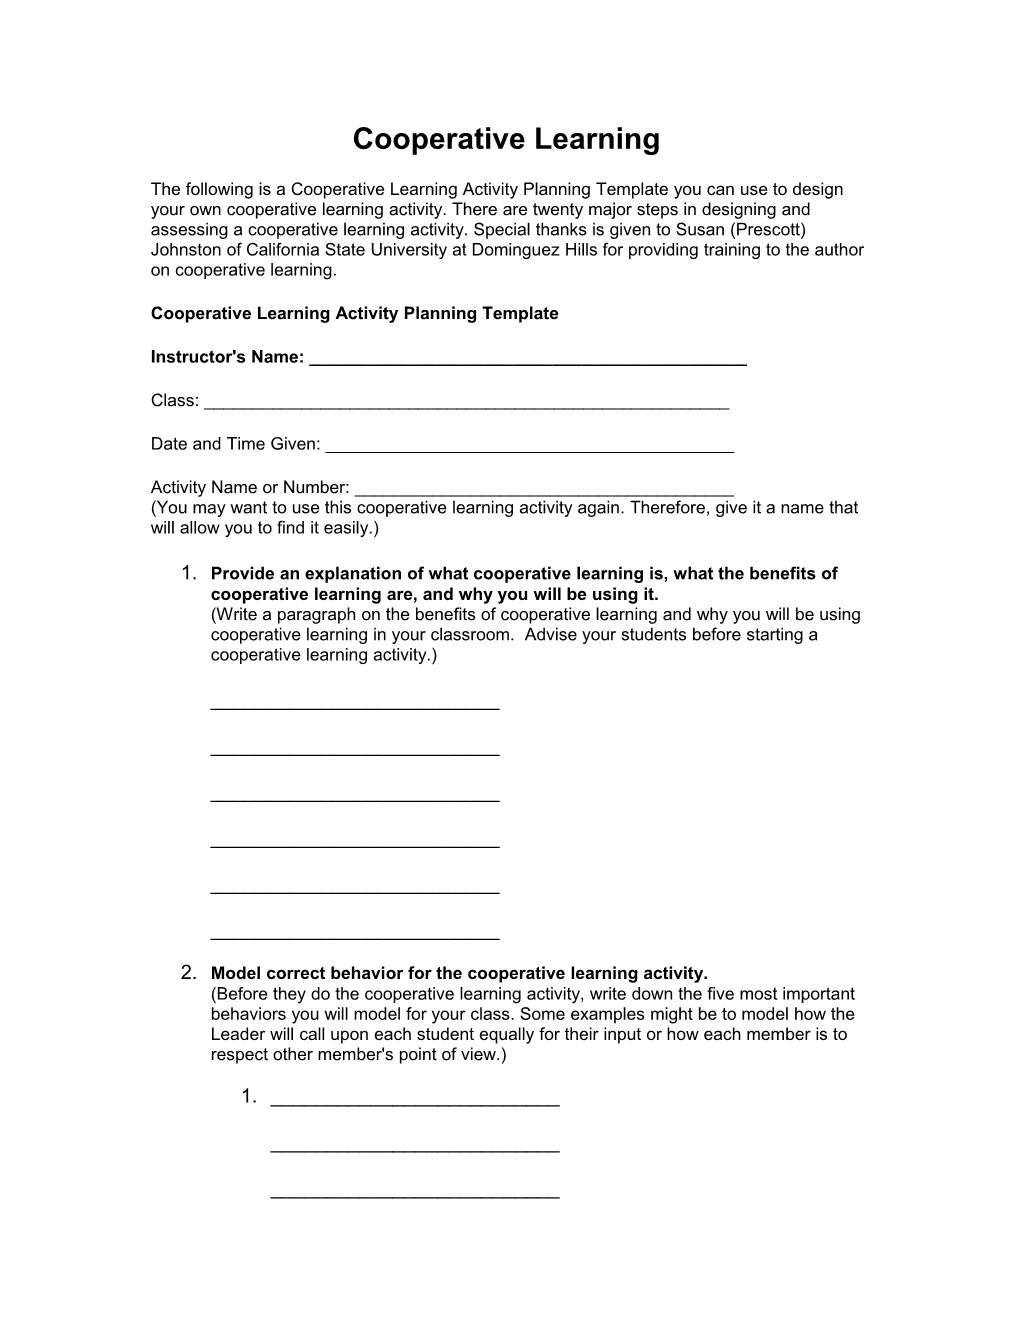 Cooperative Learning Activity Planning Template